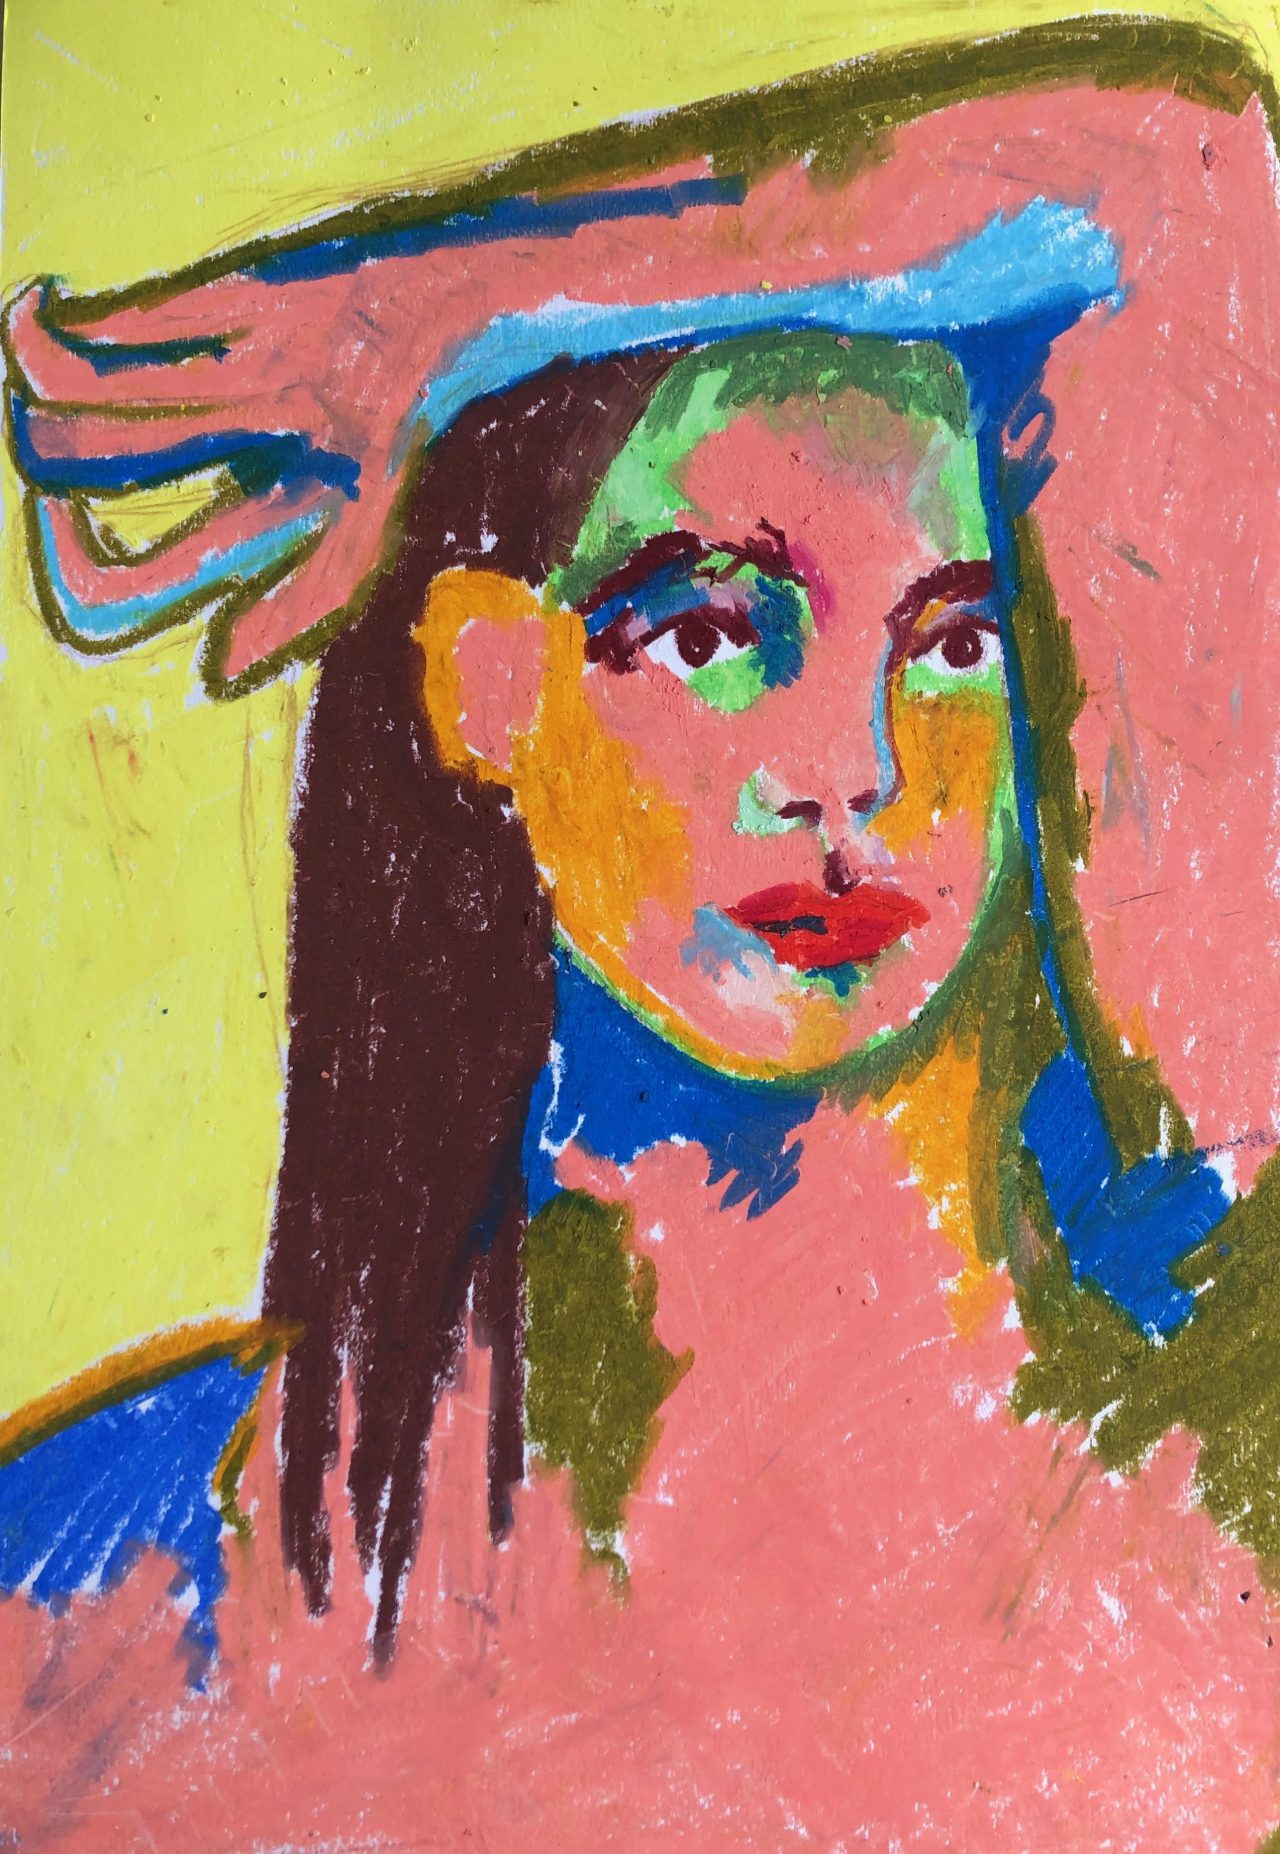 Colourful portrait oil pastel sketch by Selby Hurst Inglefield